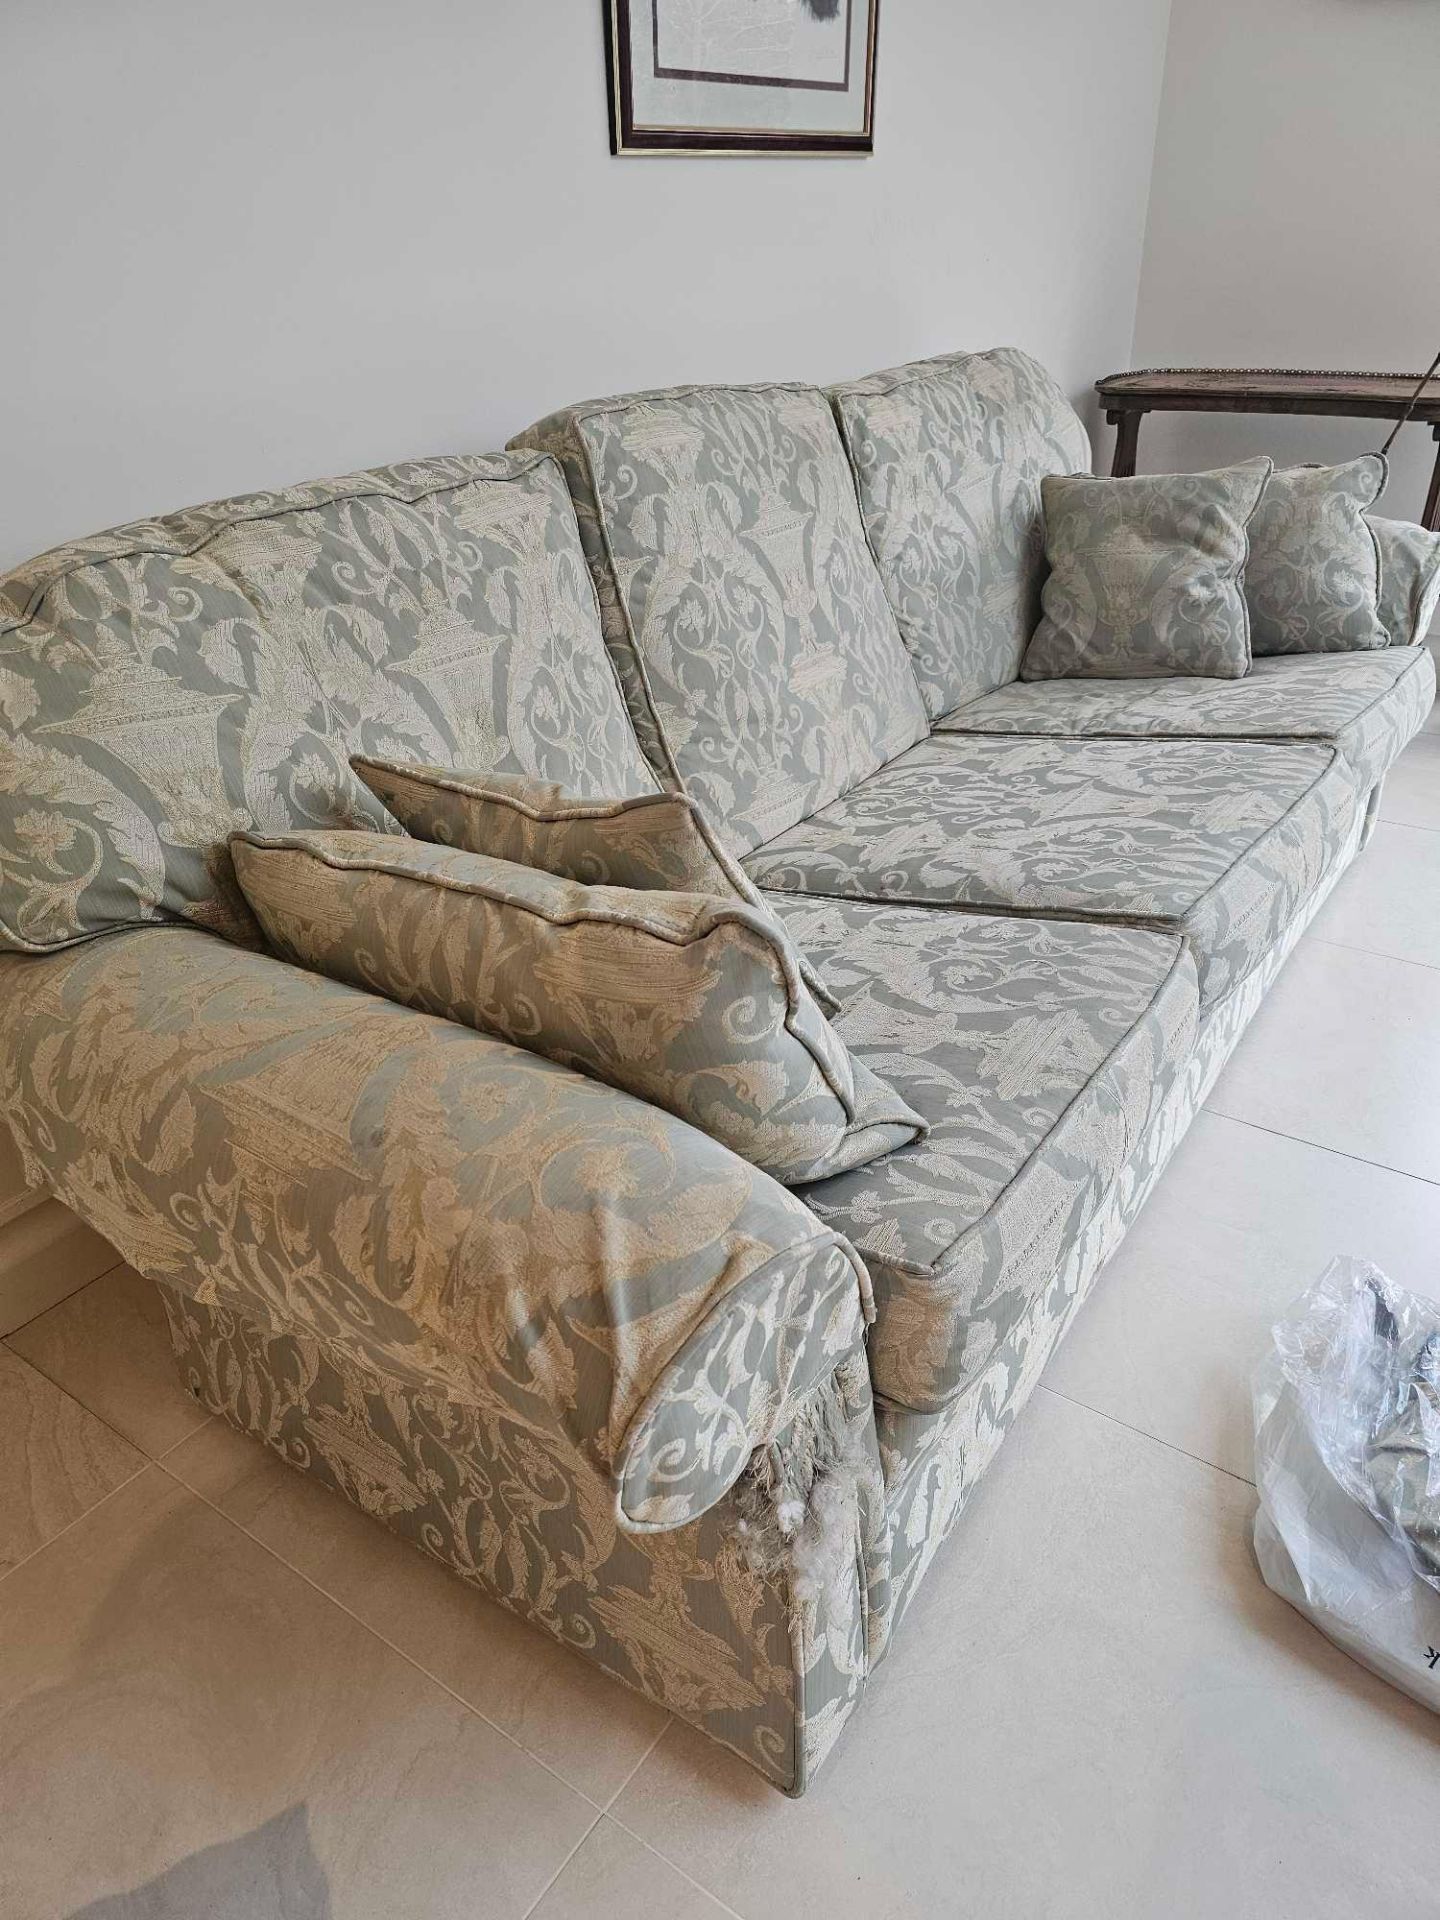 A Peter Guild Upholstered Three Seater Sofa In Damask Embossed Pattern Mint And Gold 235 X 87 X 95cm - Image 5 of 7